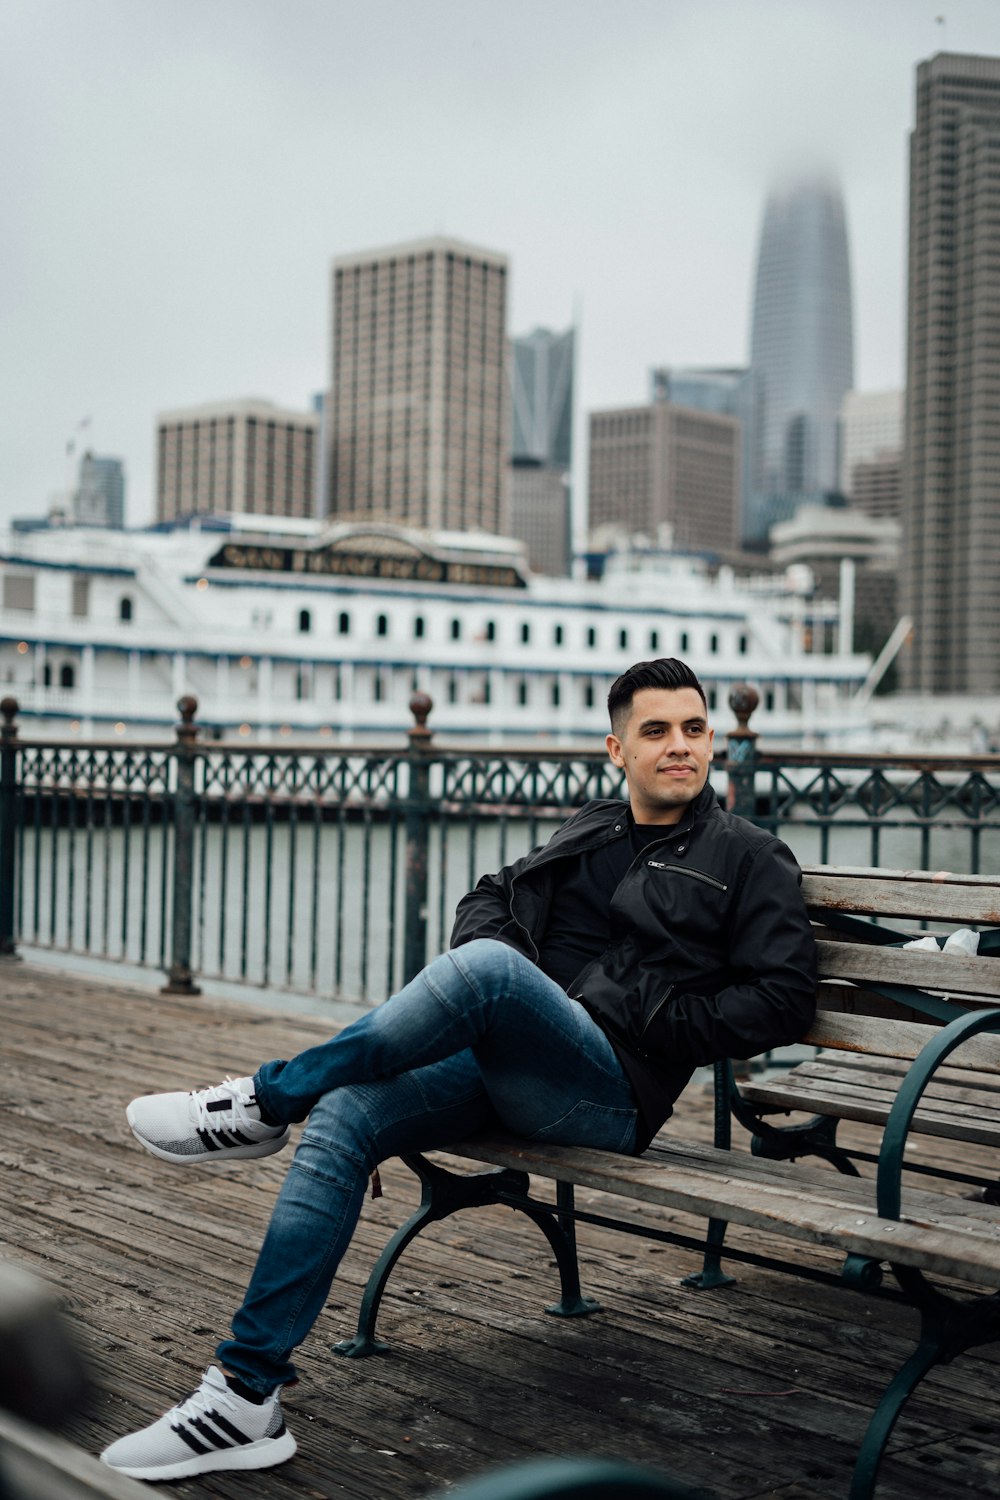 man in black jacket and blue denim jeans sitting on brown wooden bench during daytime